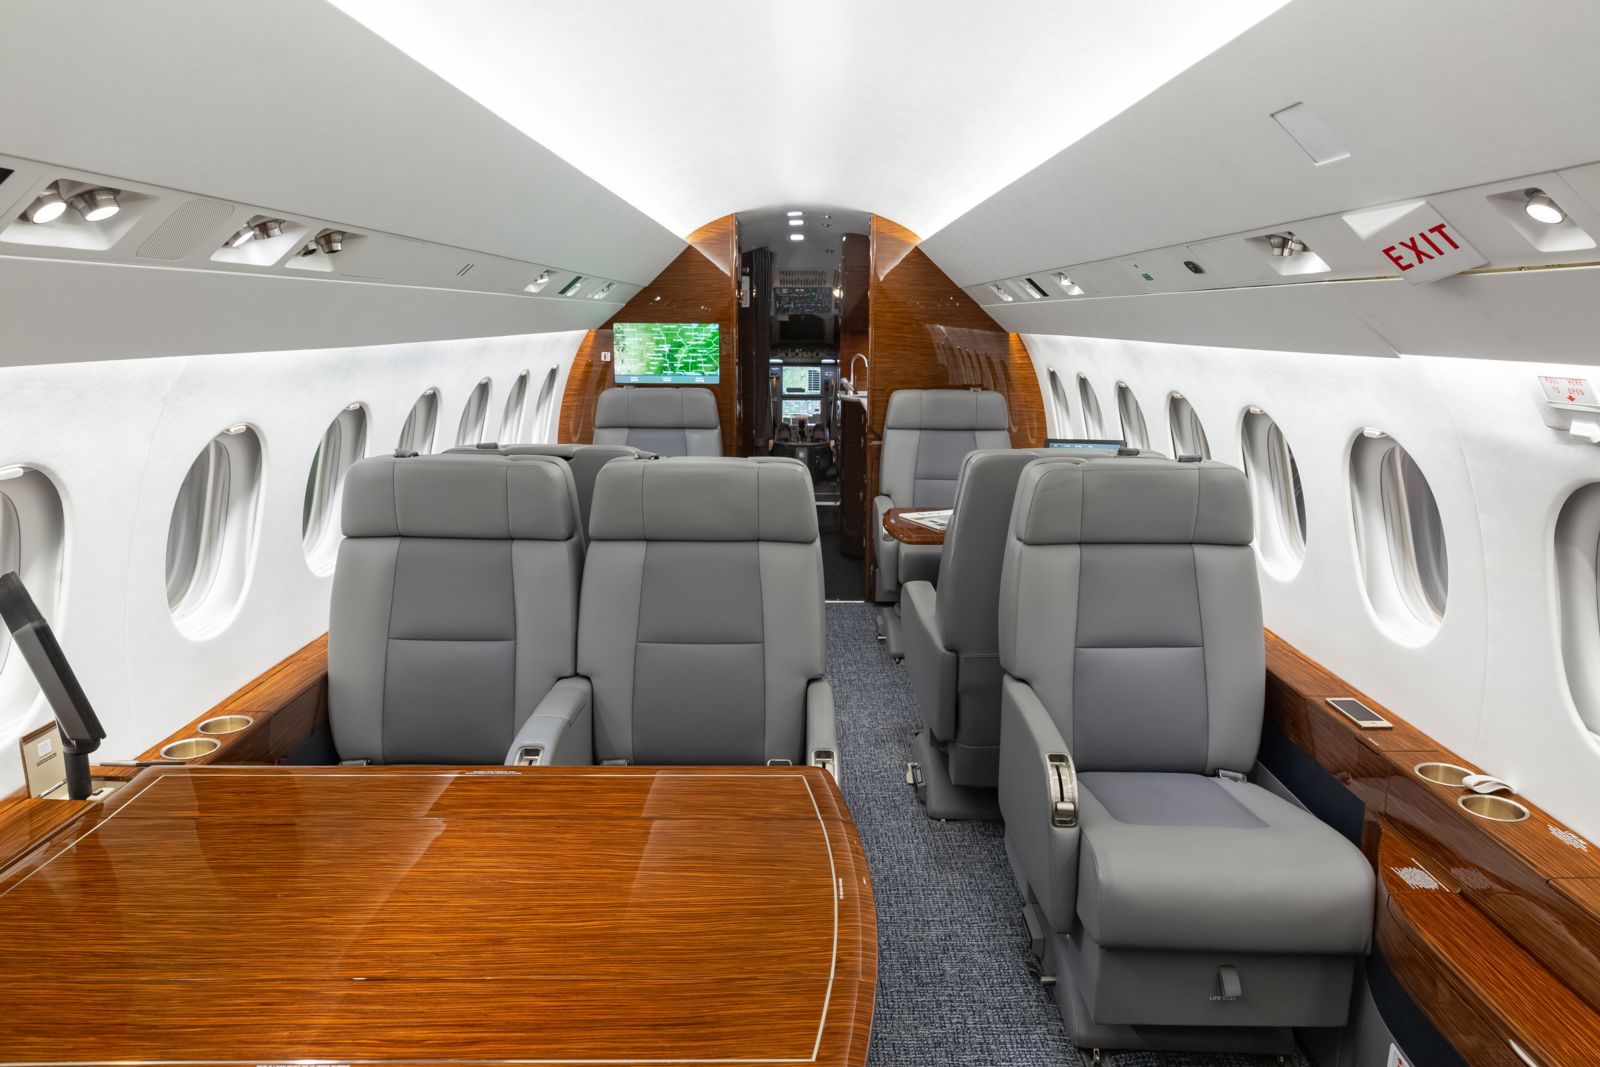 Dassault Falcon 2000LX  S/N 262 for sale | gallery image: /userfiles/files/bfp_5660.jpg